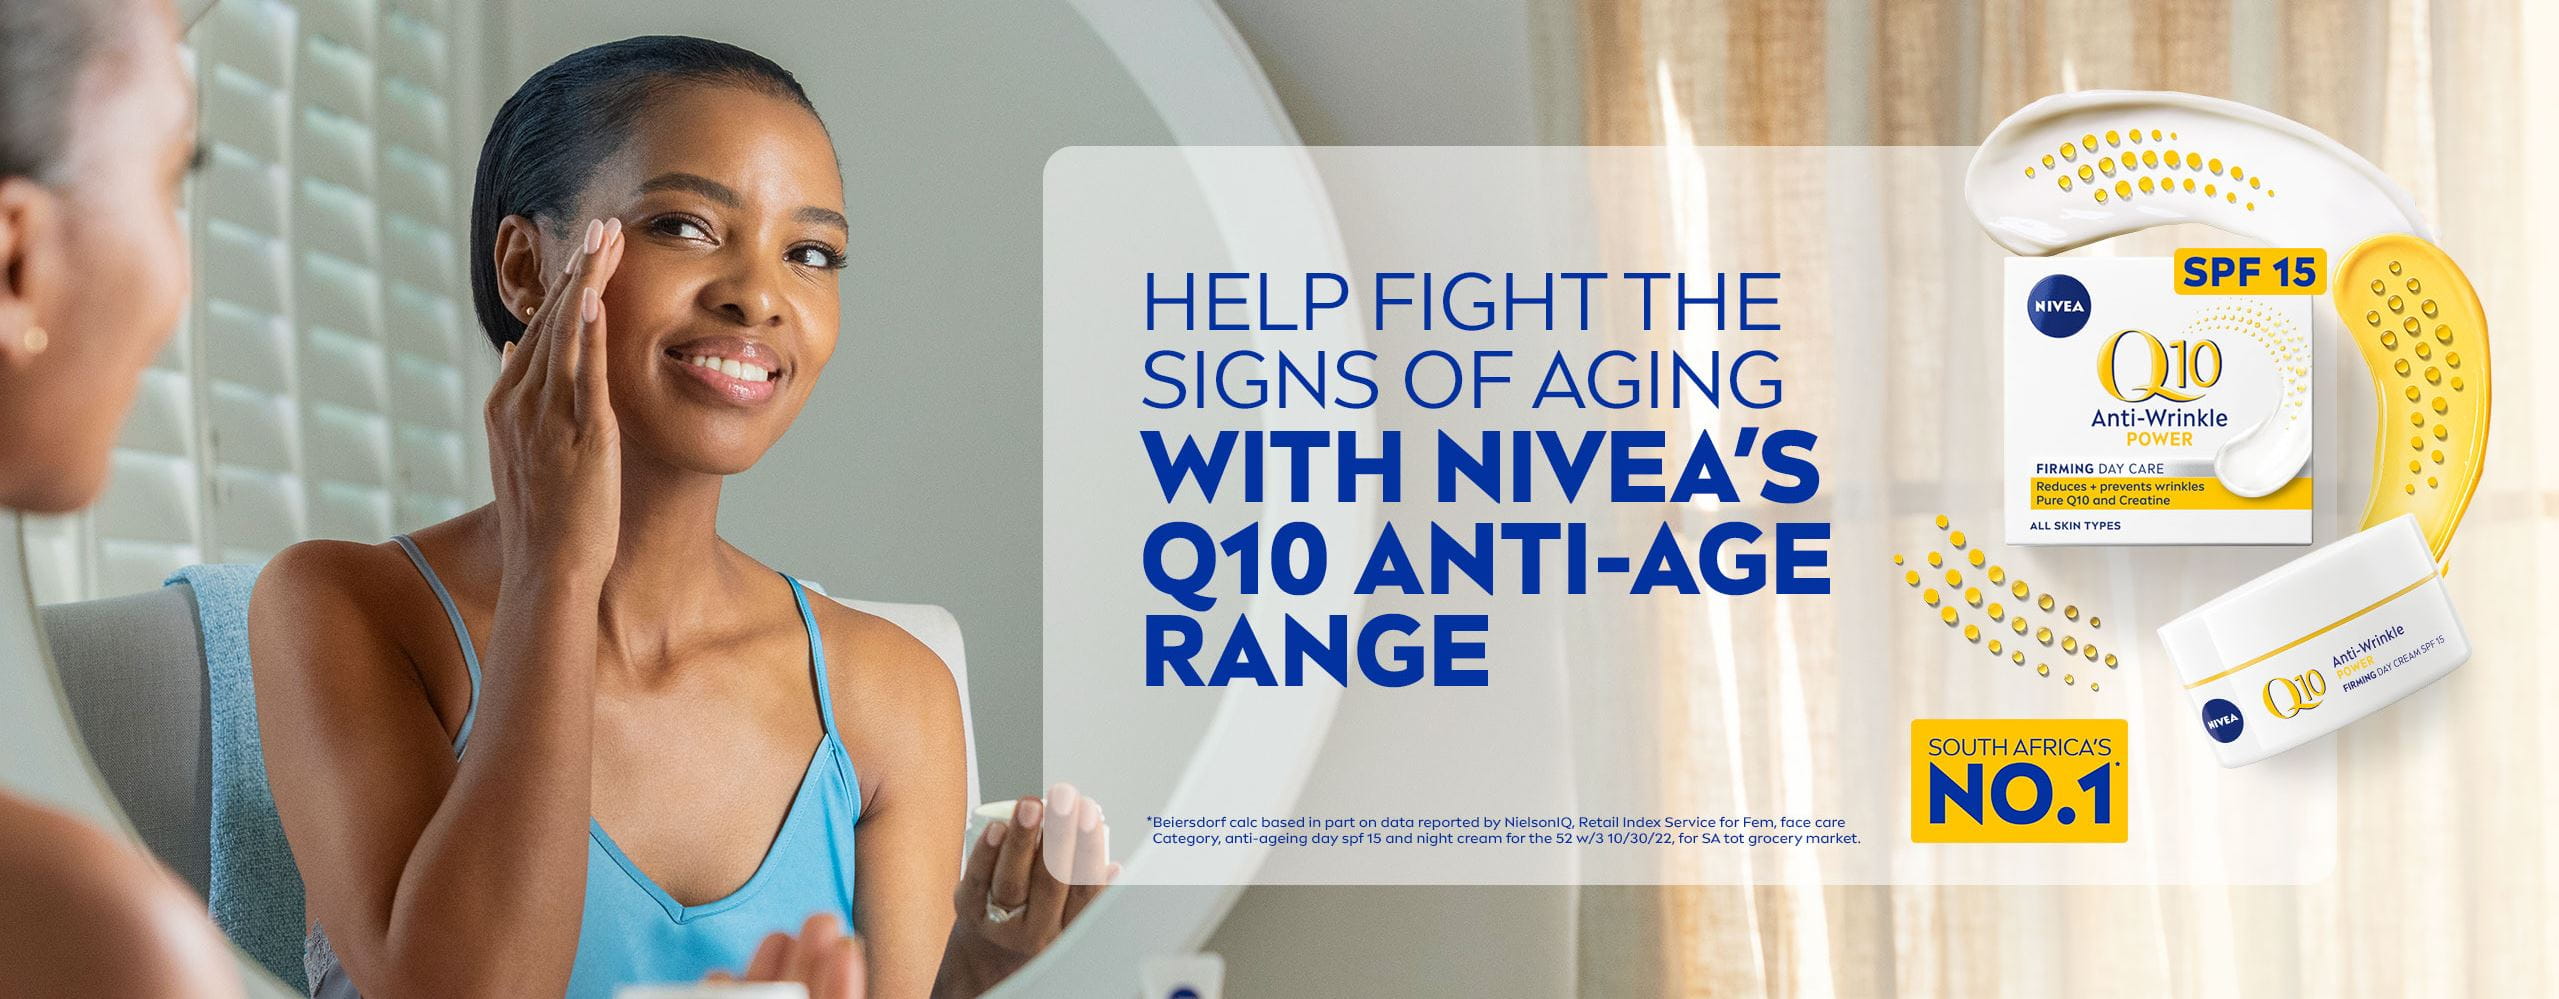 Help fight the signs of aging with NIVEA’s Q10 Anti-Age Range